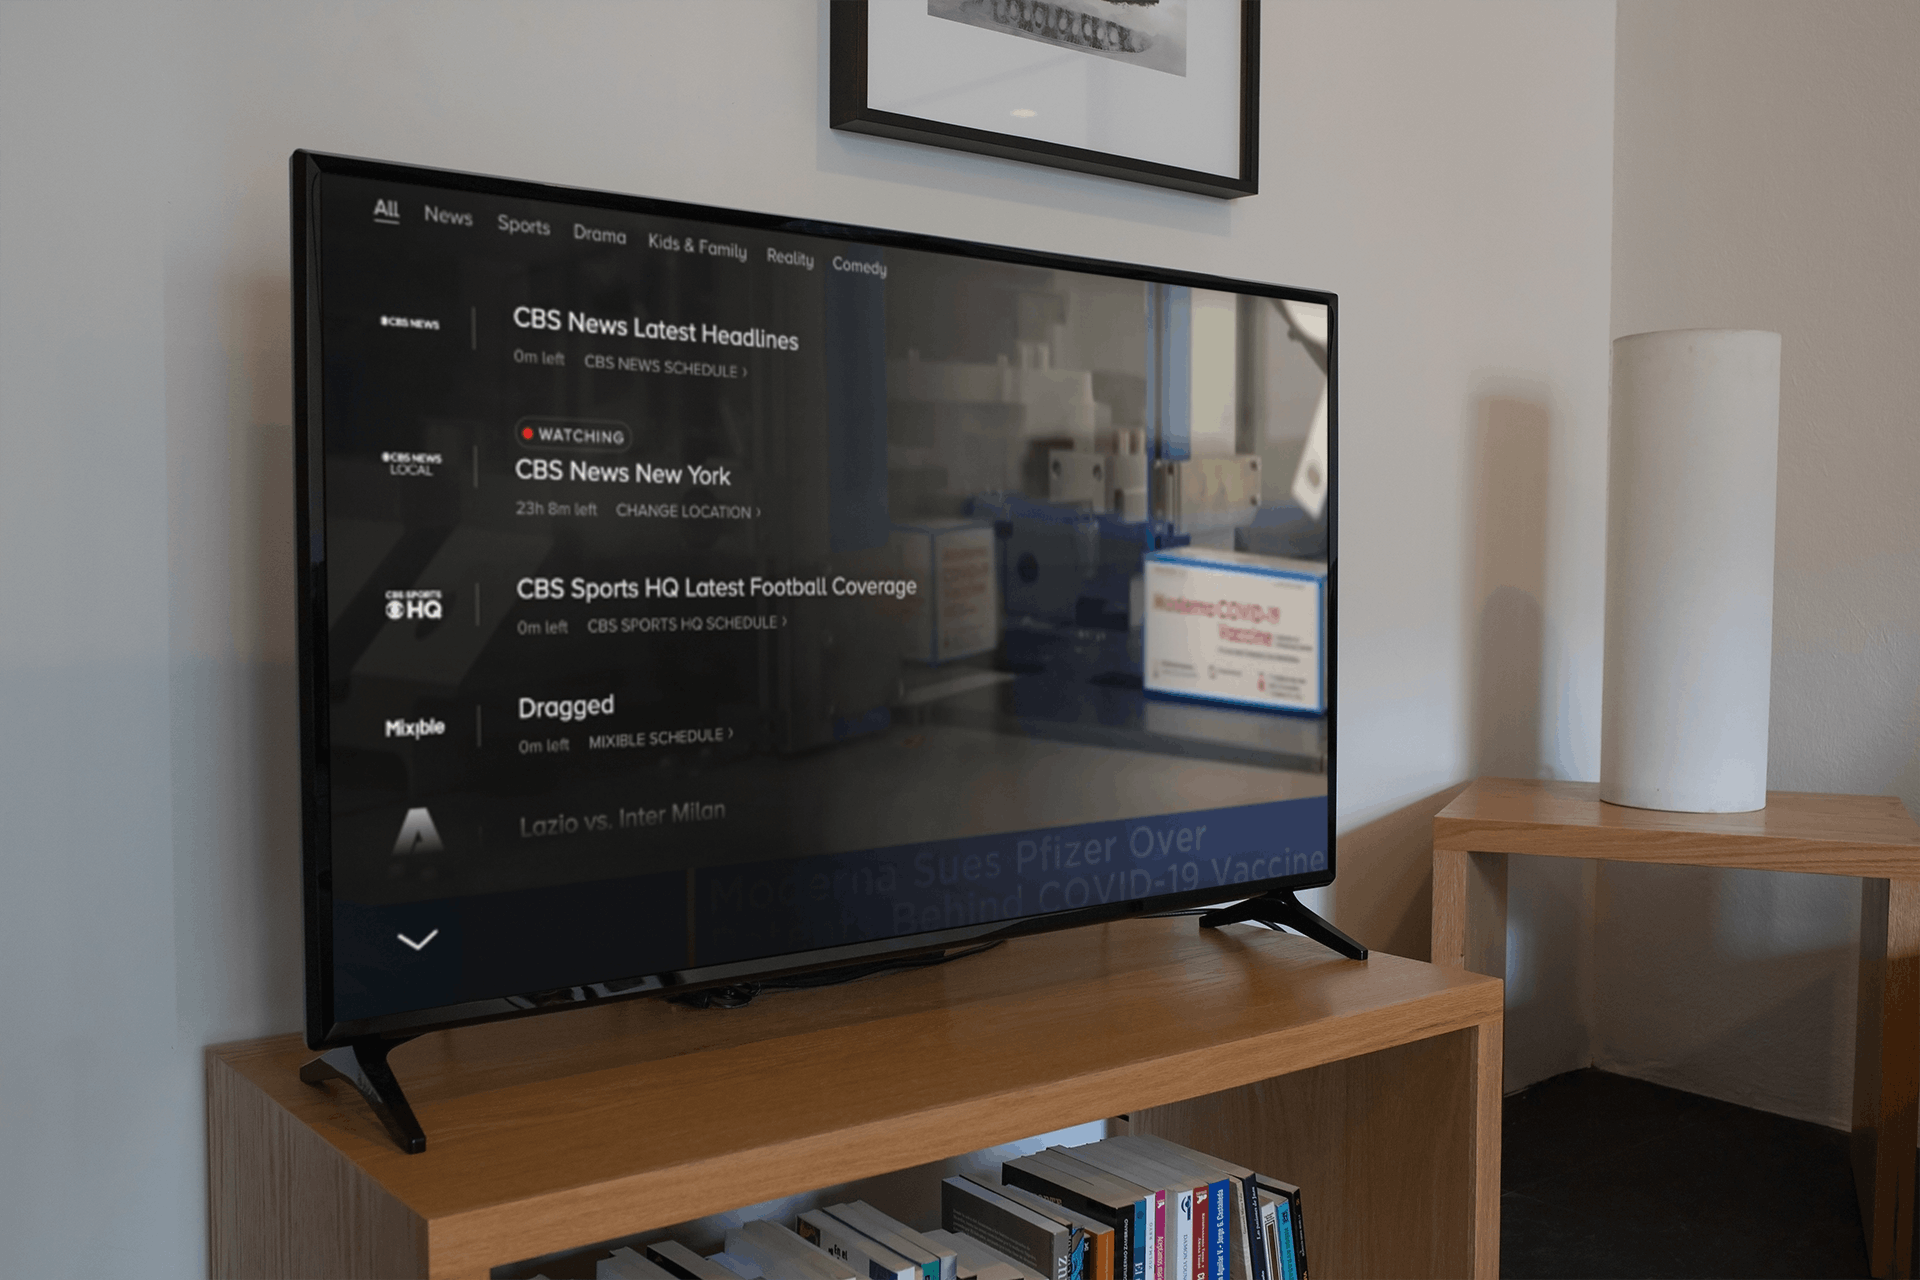 Smart tv on a wooden mookcase showing paramount plus